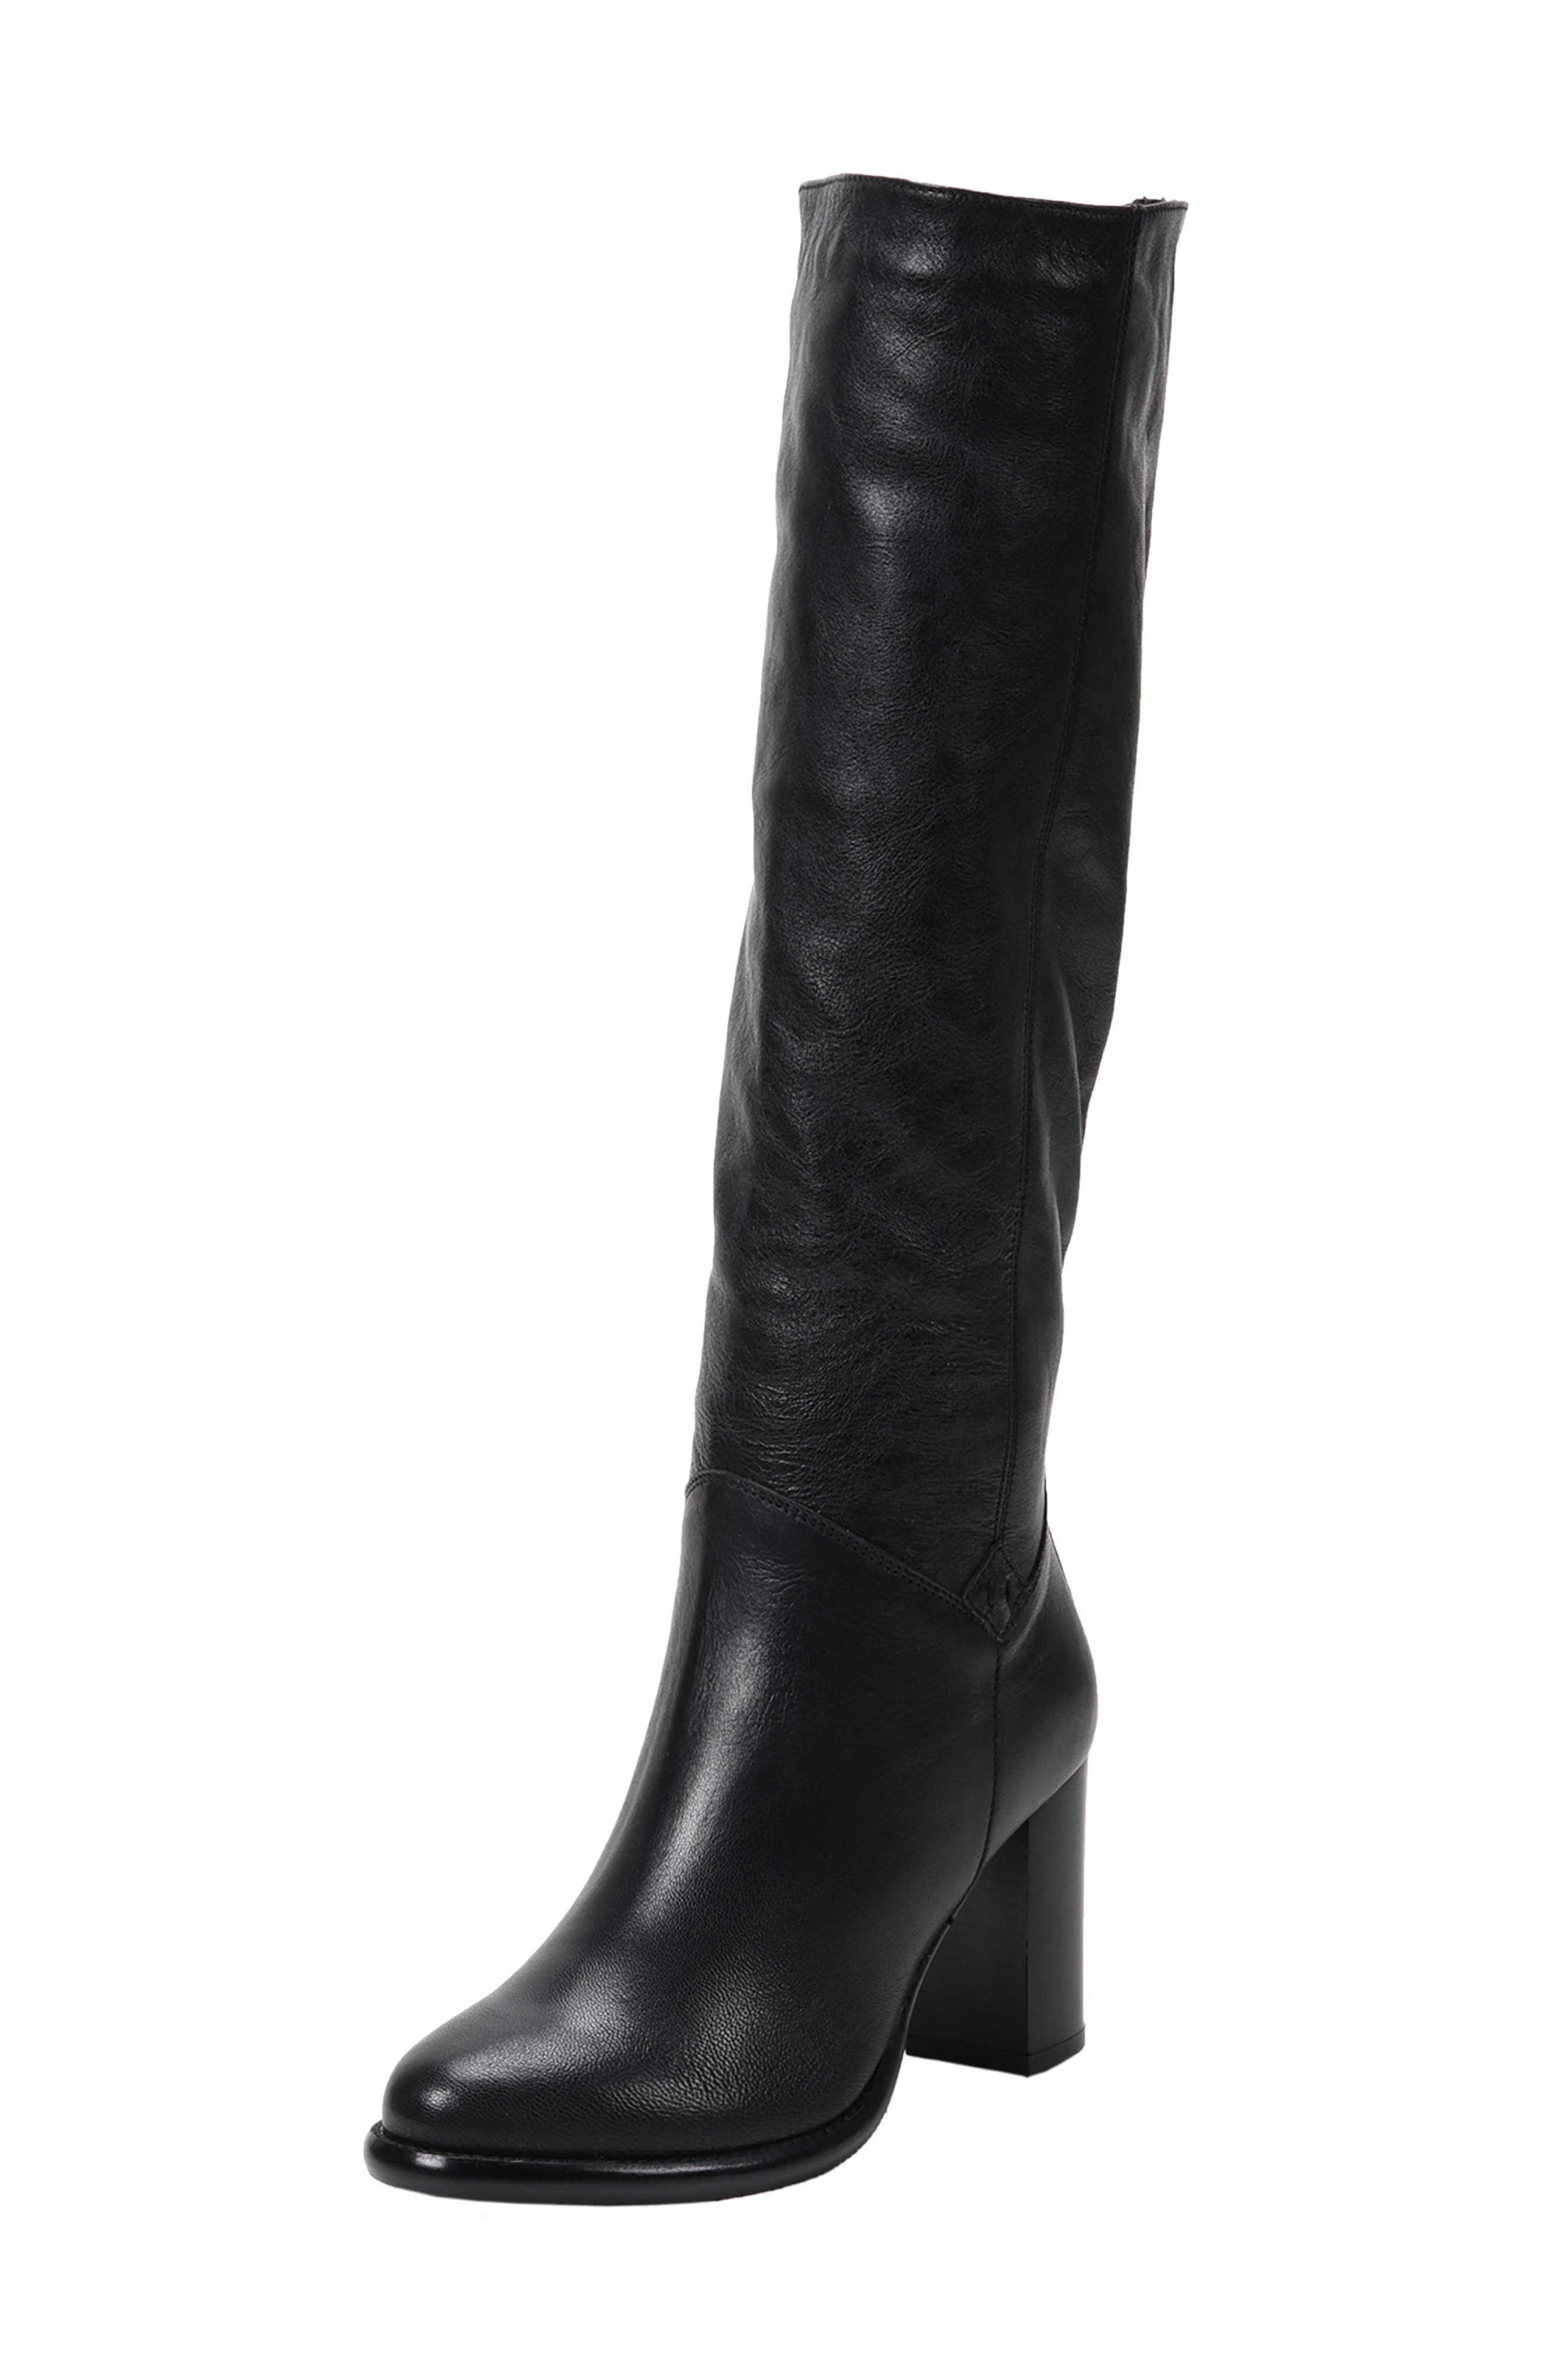 shearling lined leather boots